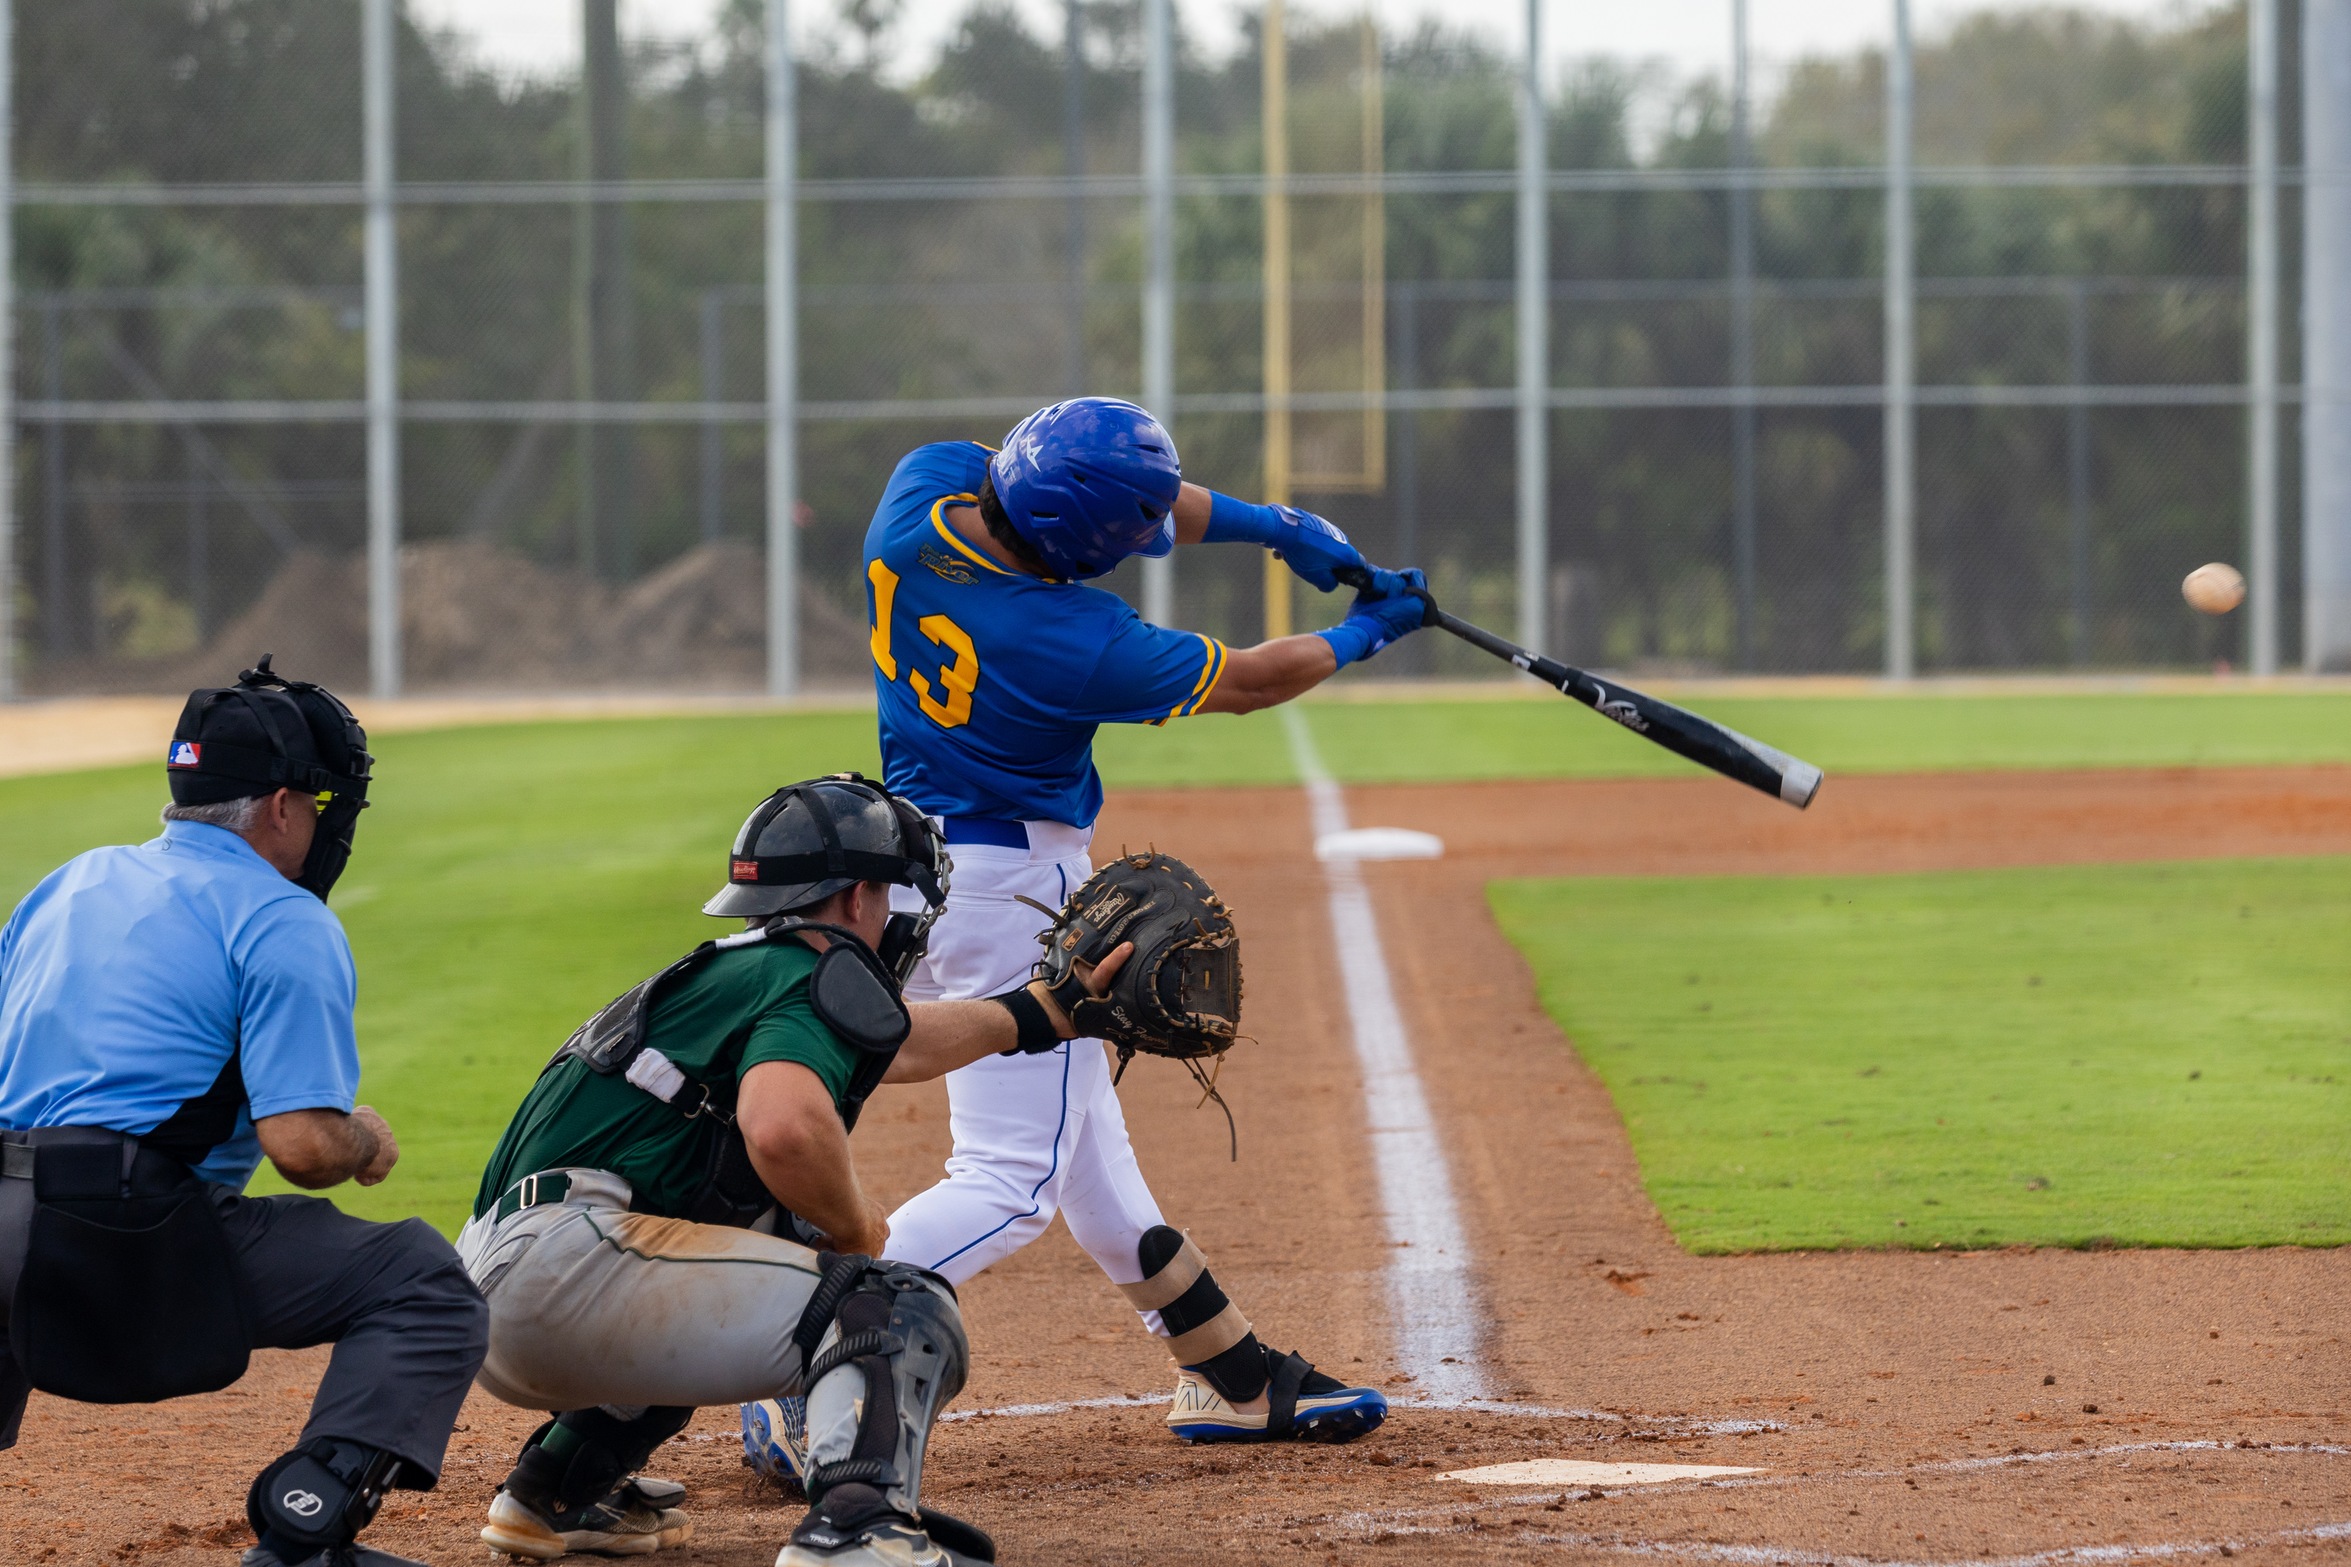 Four RBI Day for Raul Feliz Spells Out Victory For Indian River State College Pioneers Over Tnxl